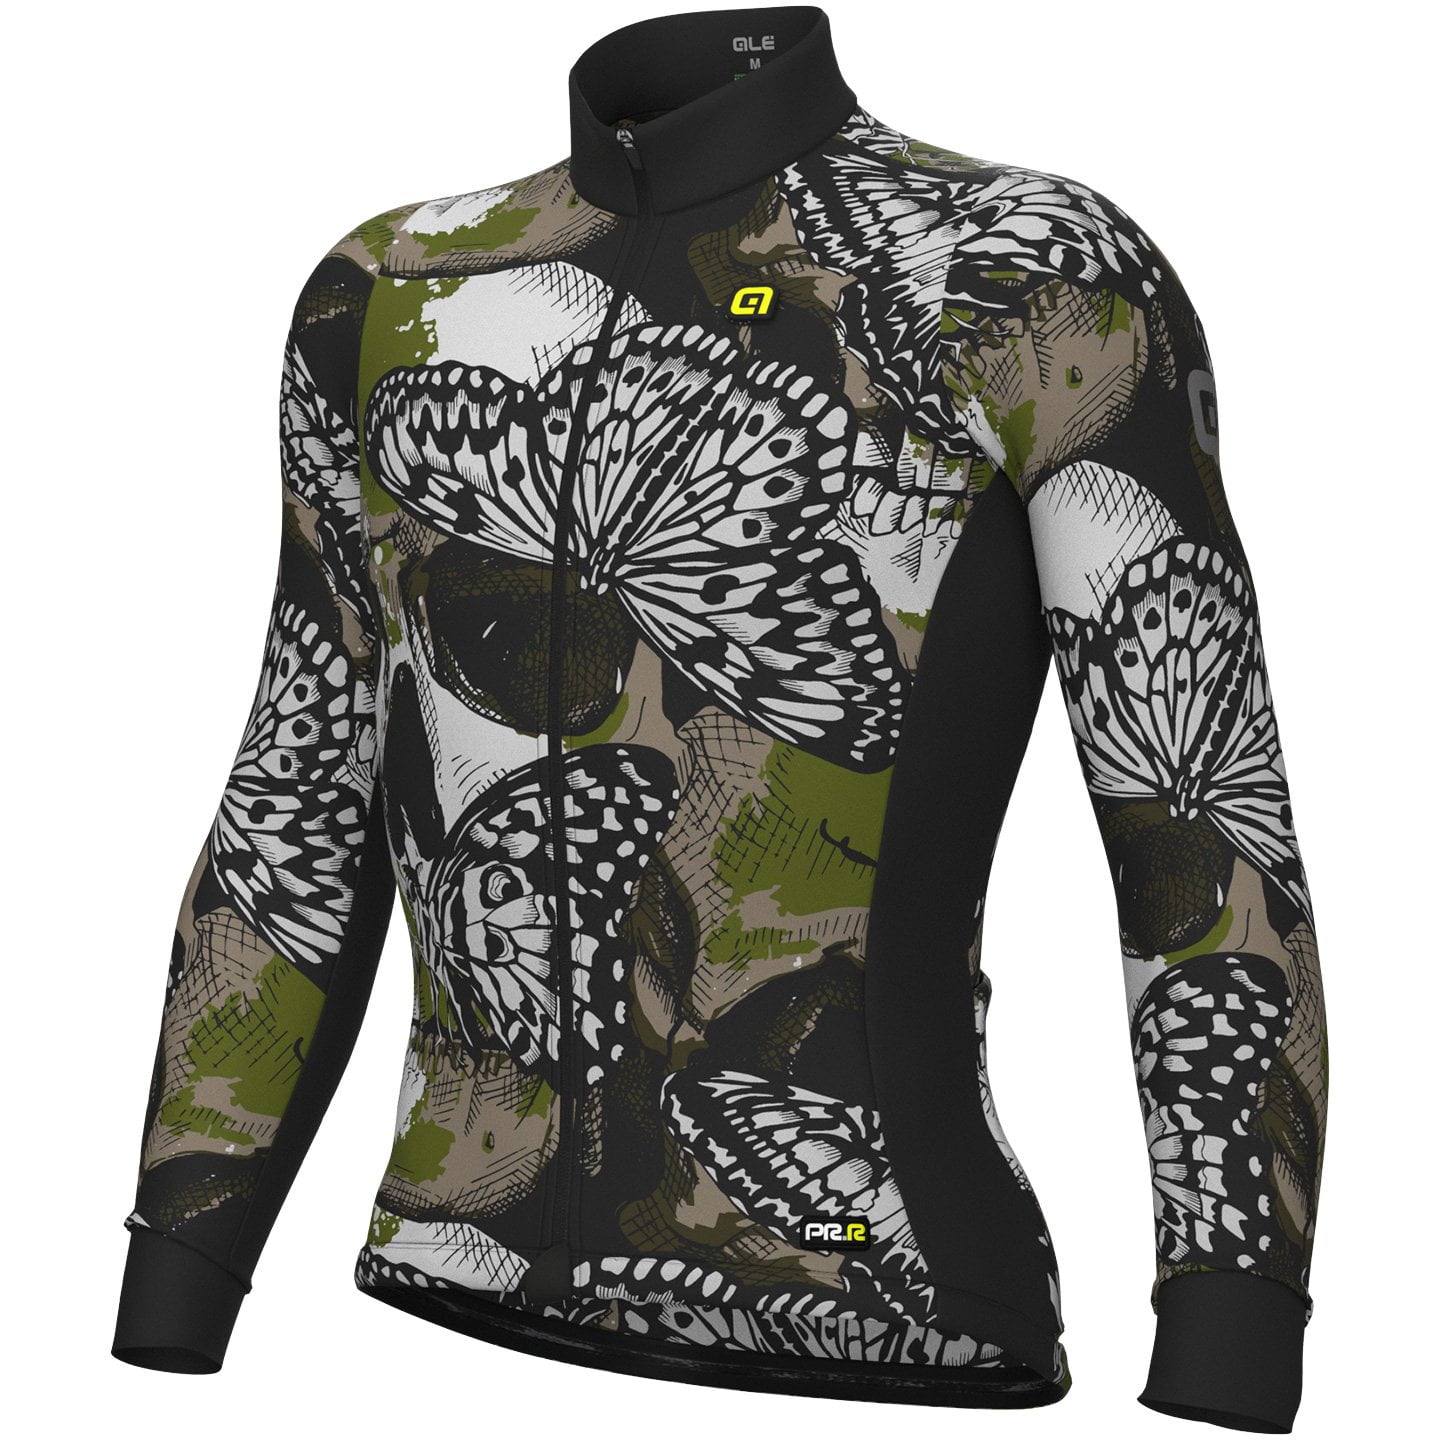 ALE Falena Long Sleeve Jersey Long Sleeve Jersey, for men, size L, Cycling jersey, Cycling clothing